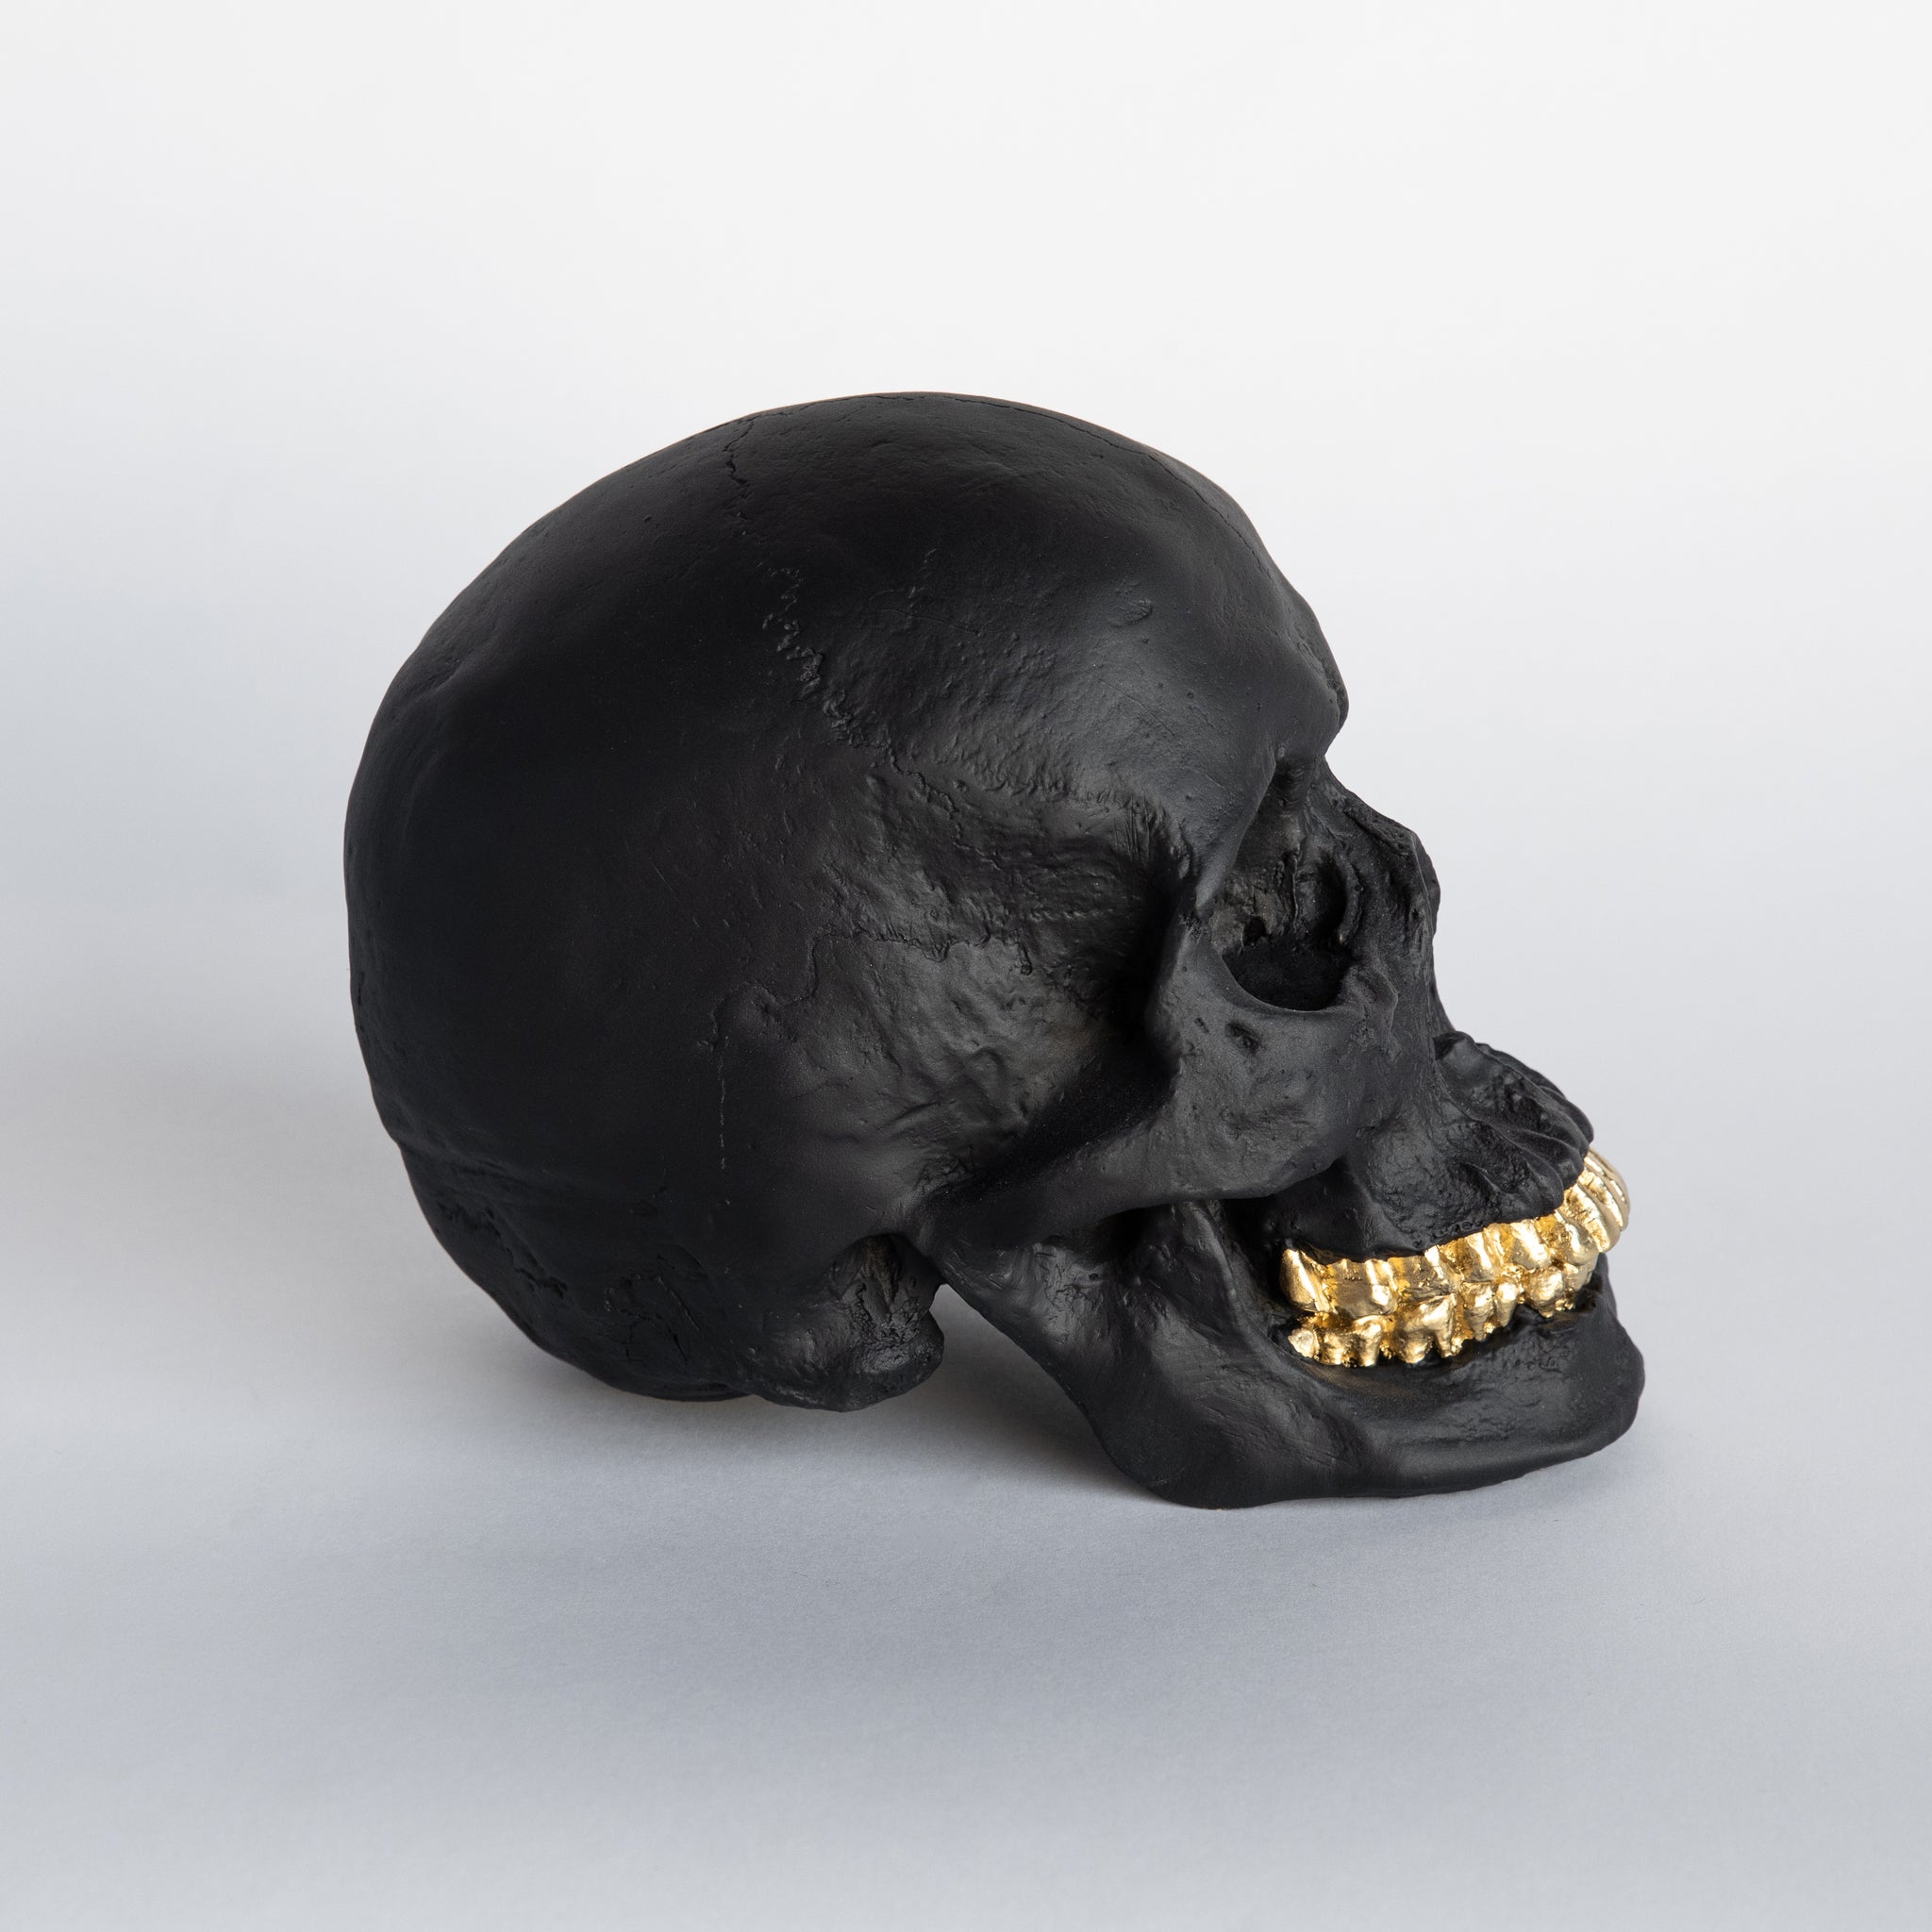 Faux Human Skull Replica // Black with Gold Teeth